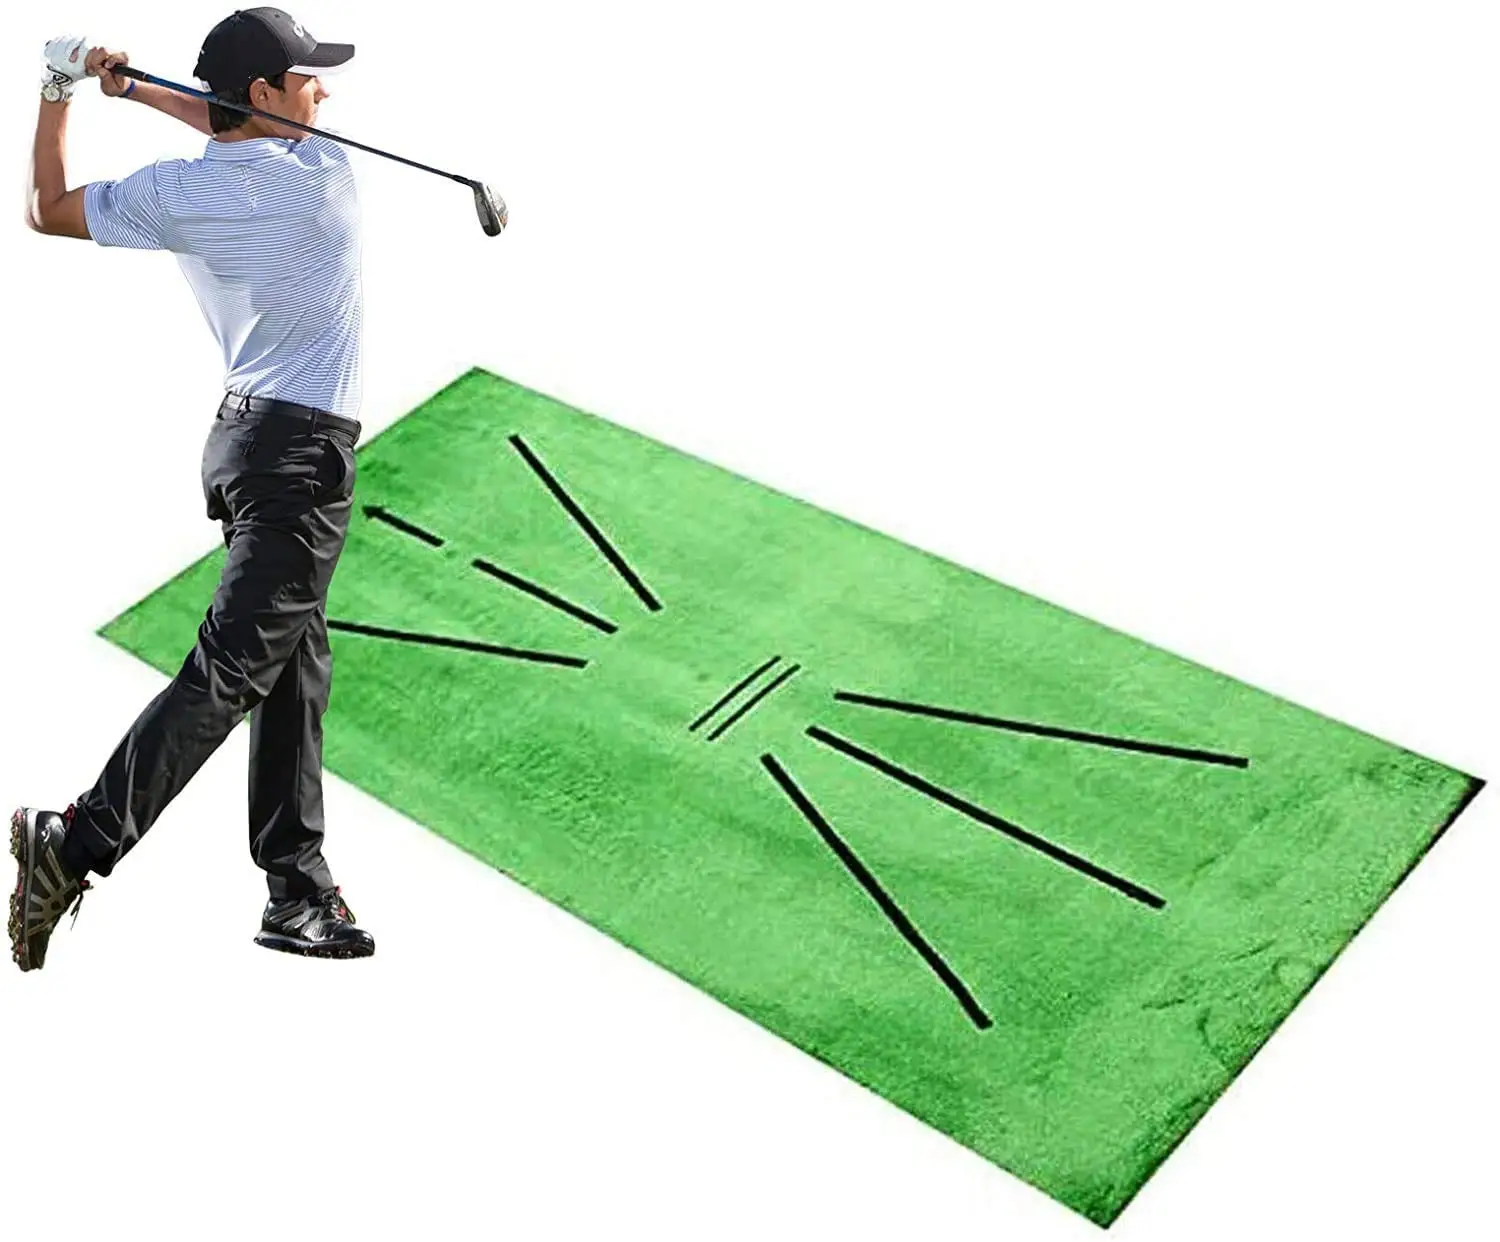 

Mini Golf Training Aid mat Course Non-Slip Swing Trainer Detection Batting Golf Practice Training Aid Game for Home Office